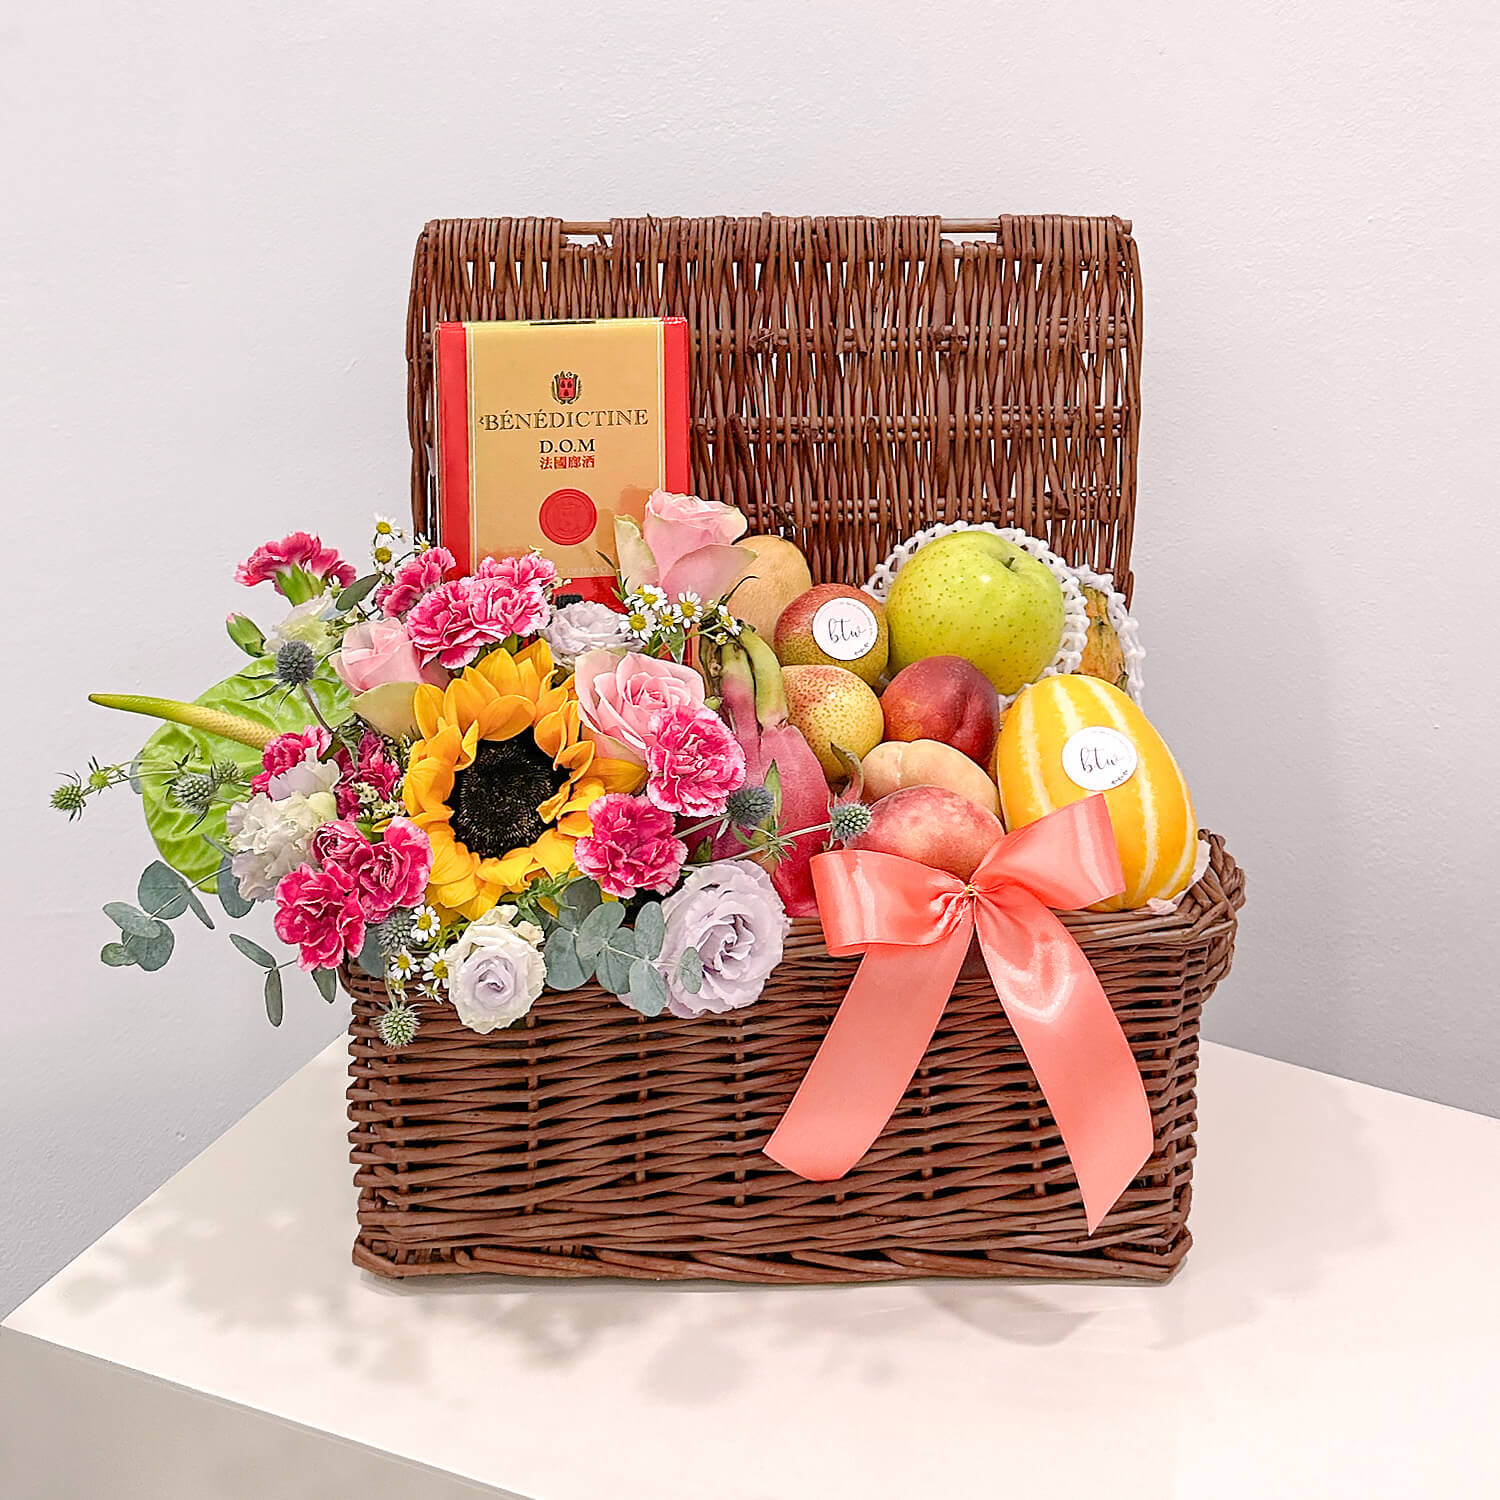 Ignite your summer with captivating sunflower gift baskets, full of fresh fruits and nourishing treats, the perfect combination of beauty and wellness to your doorstep.